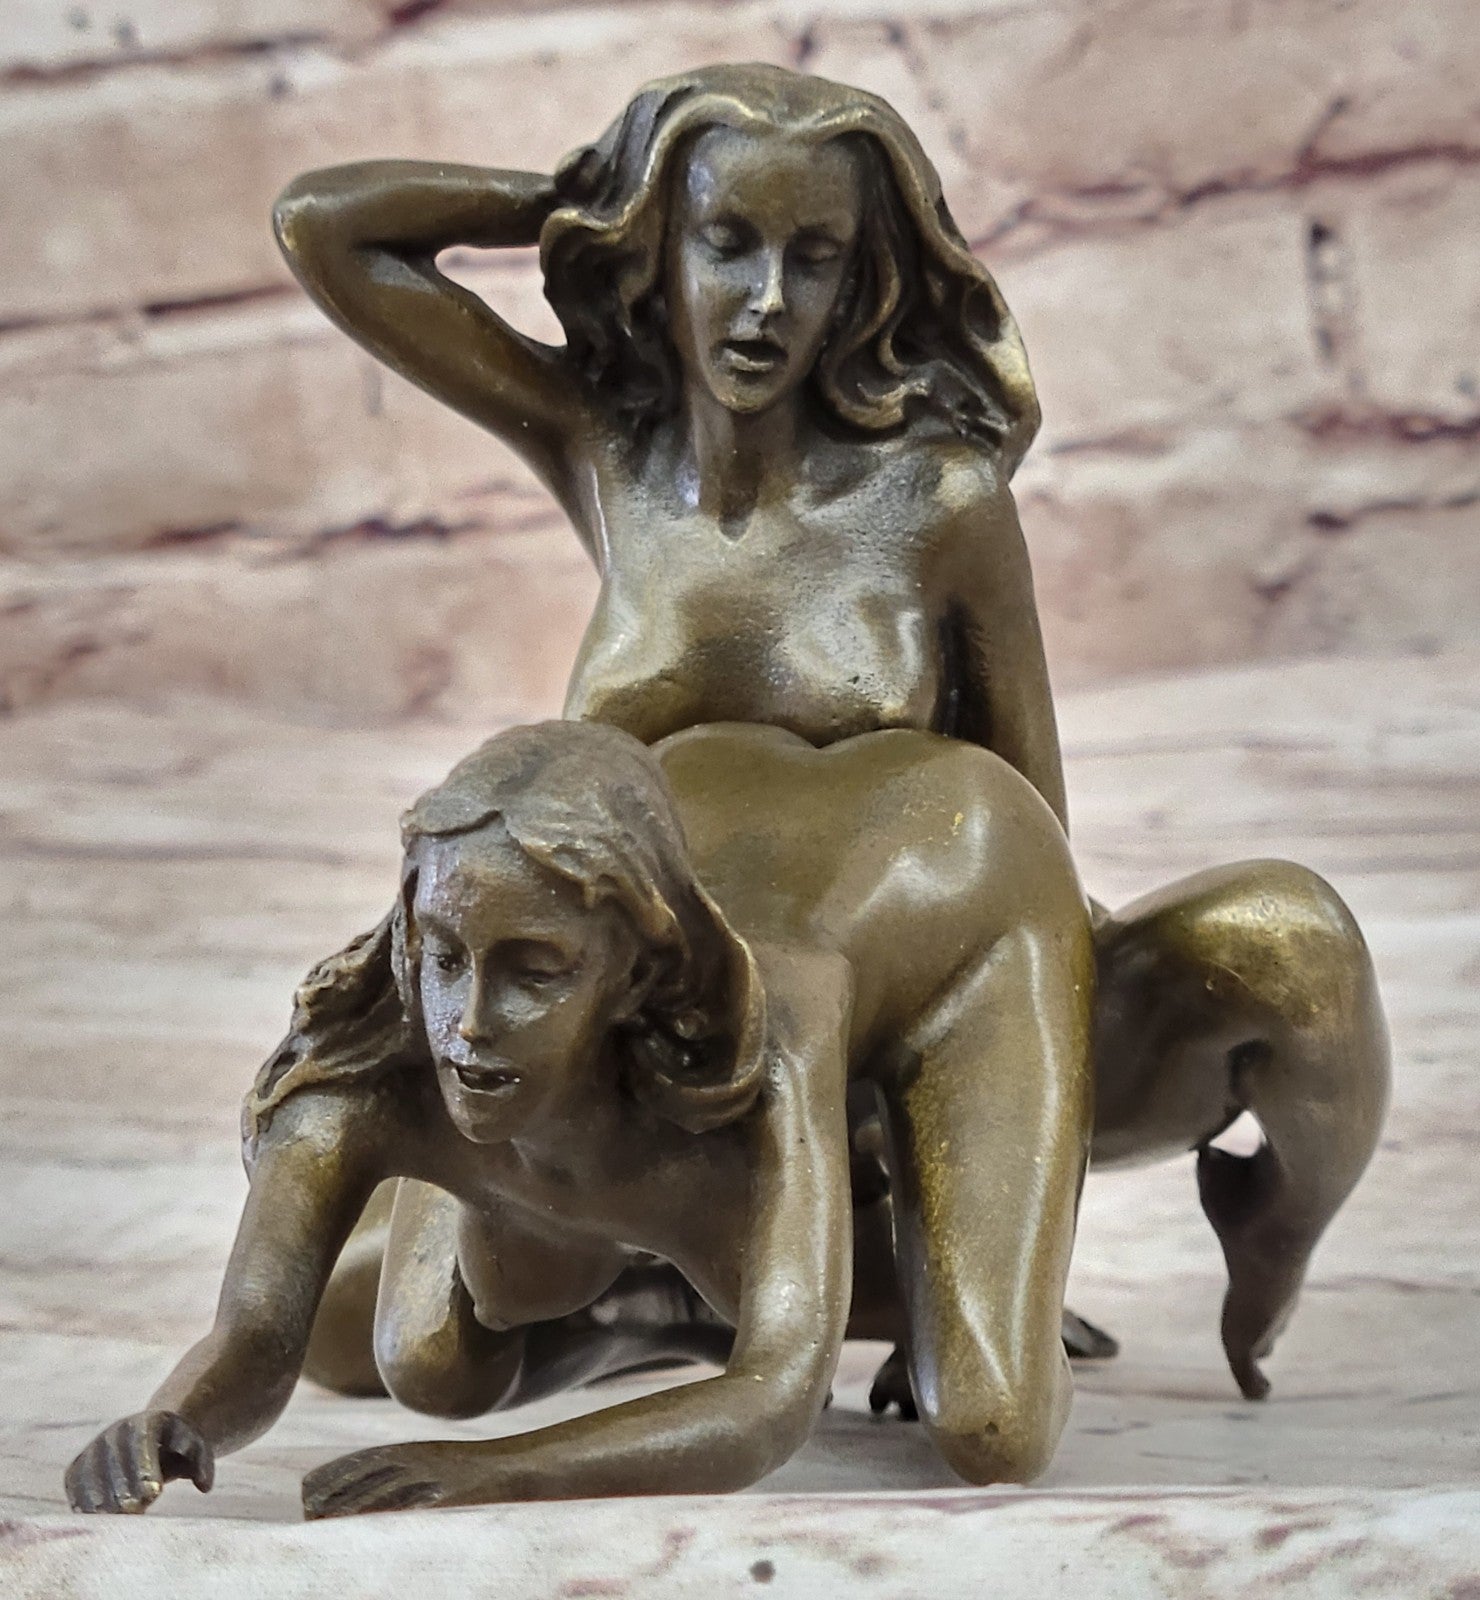 100% Real Bronze Jean Patoue re Nude Girls Lovers Couple Erotic Sexy Art